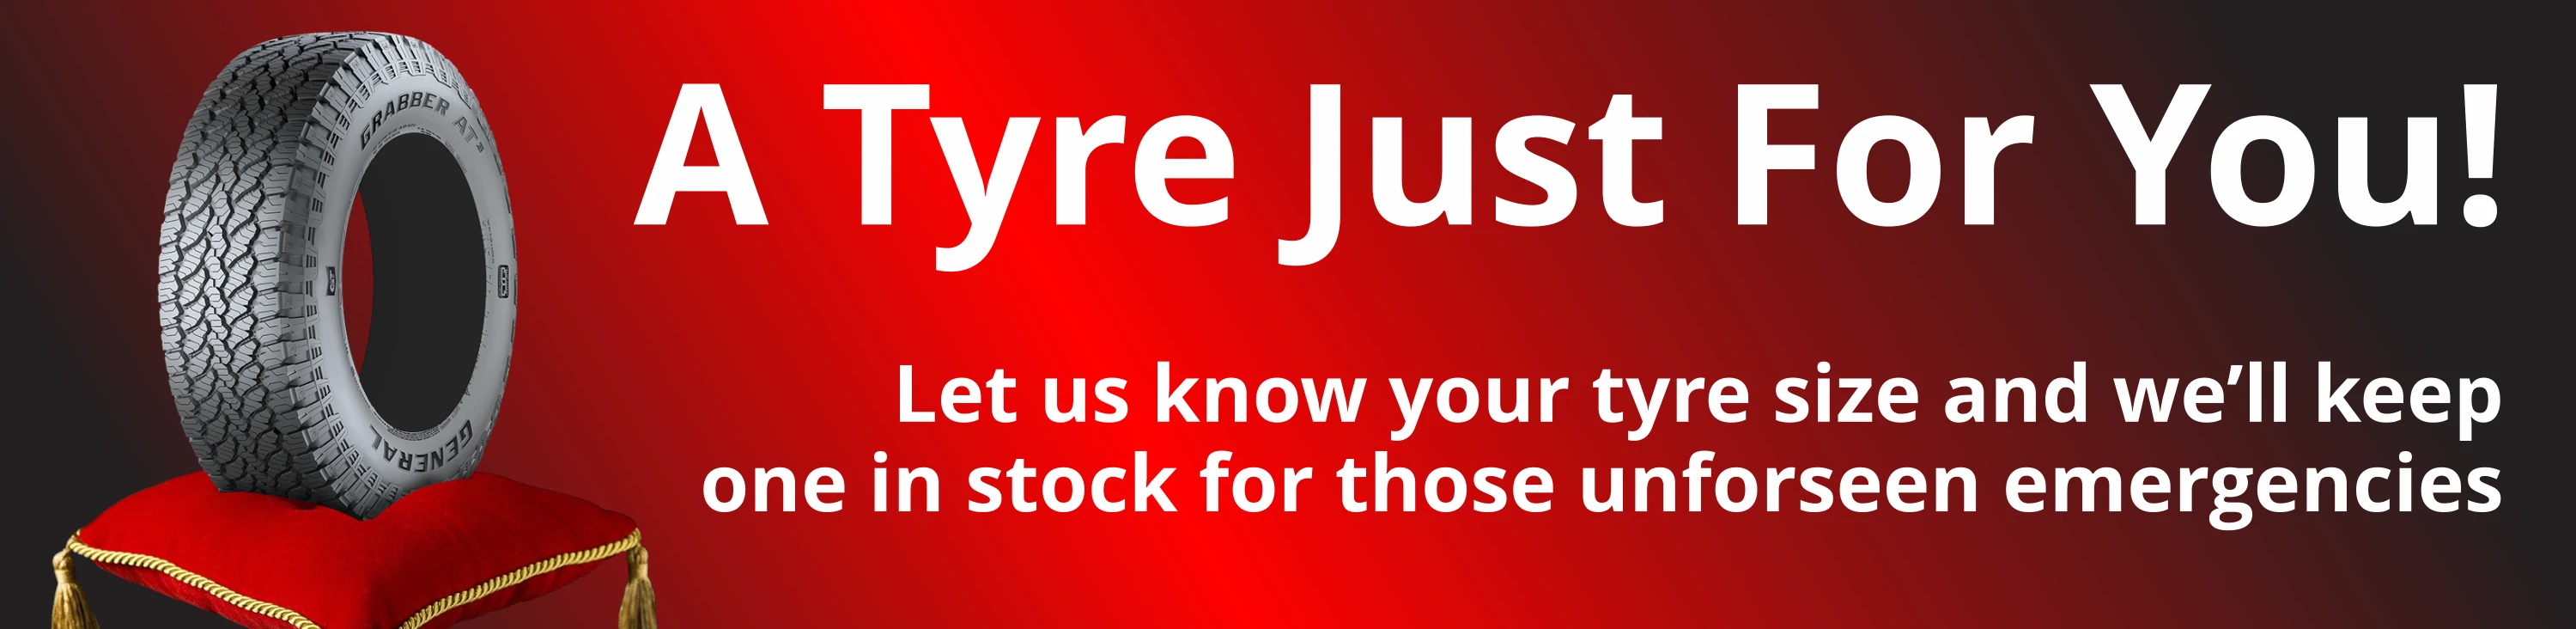 A tyre just for you. Let us know your size and we'll keep one in stock for unseen emergencies